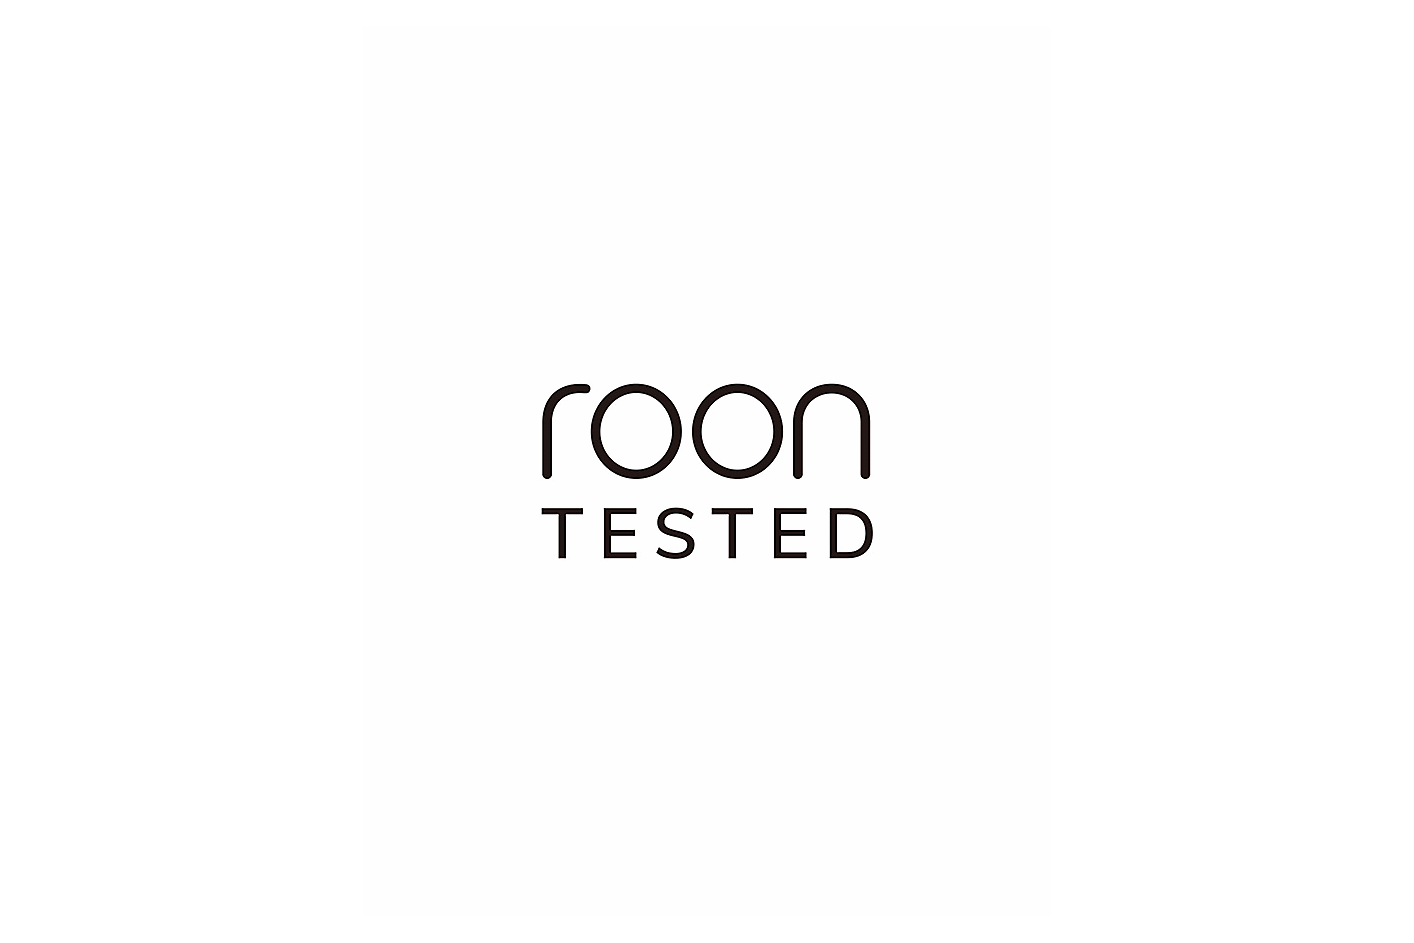  Image of a roon tested logo